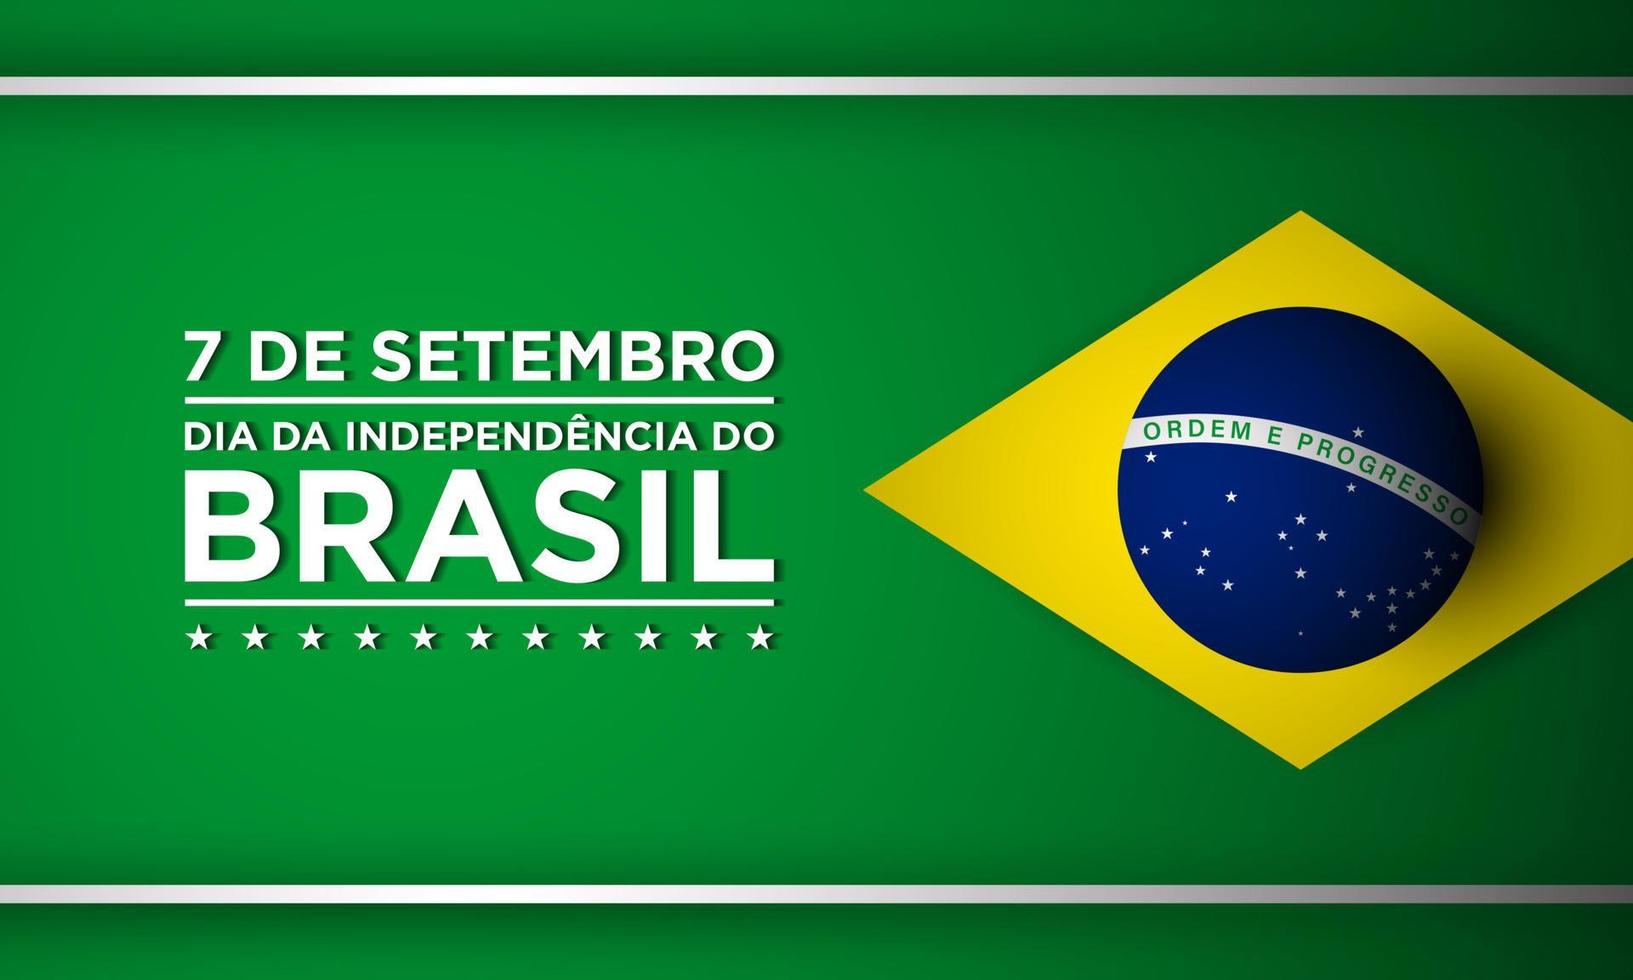 Brazil Independence Day Background Design Template. vector